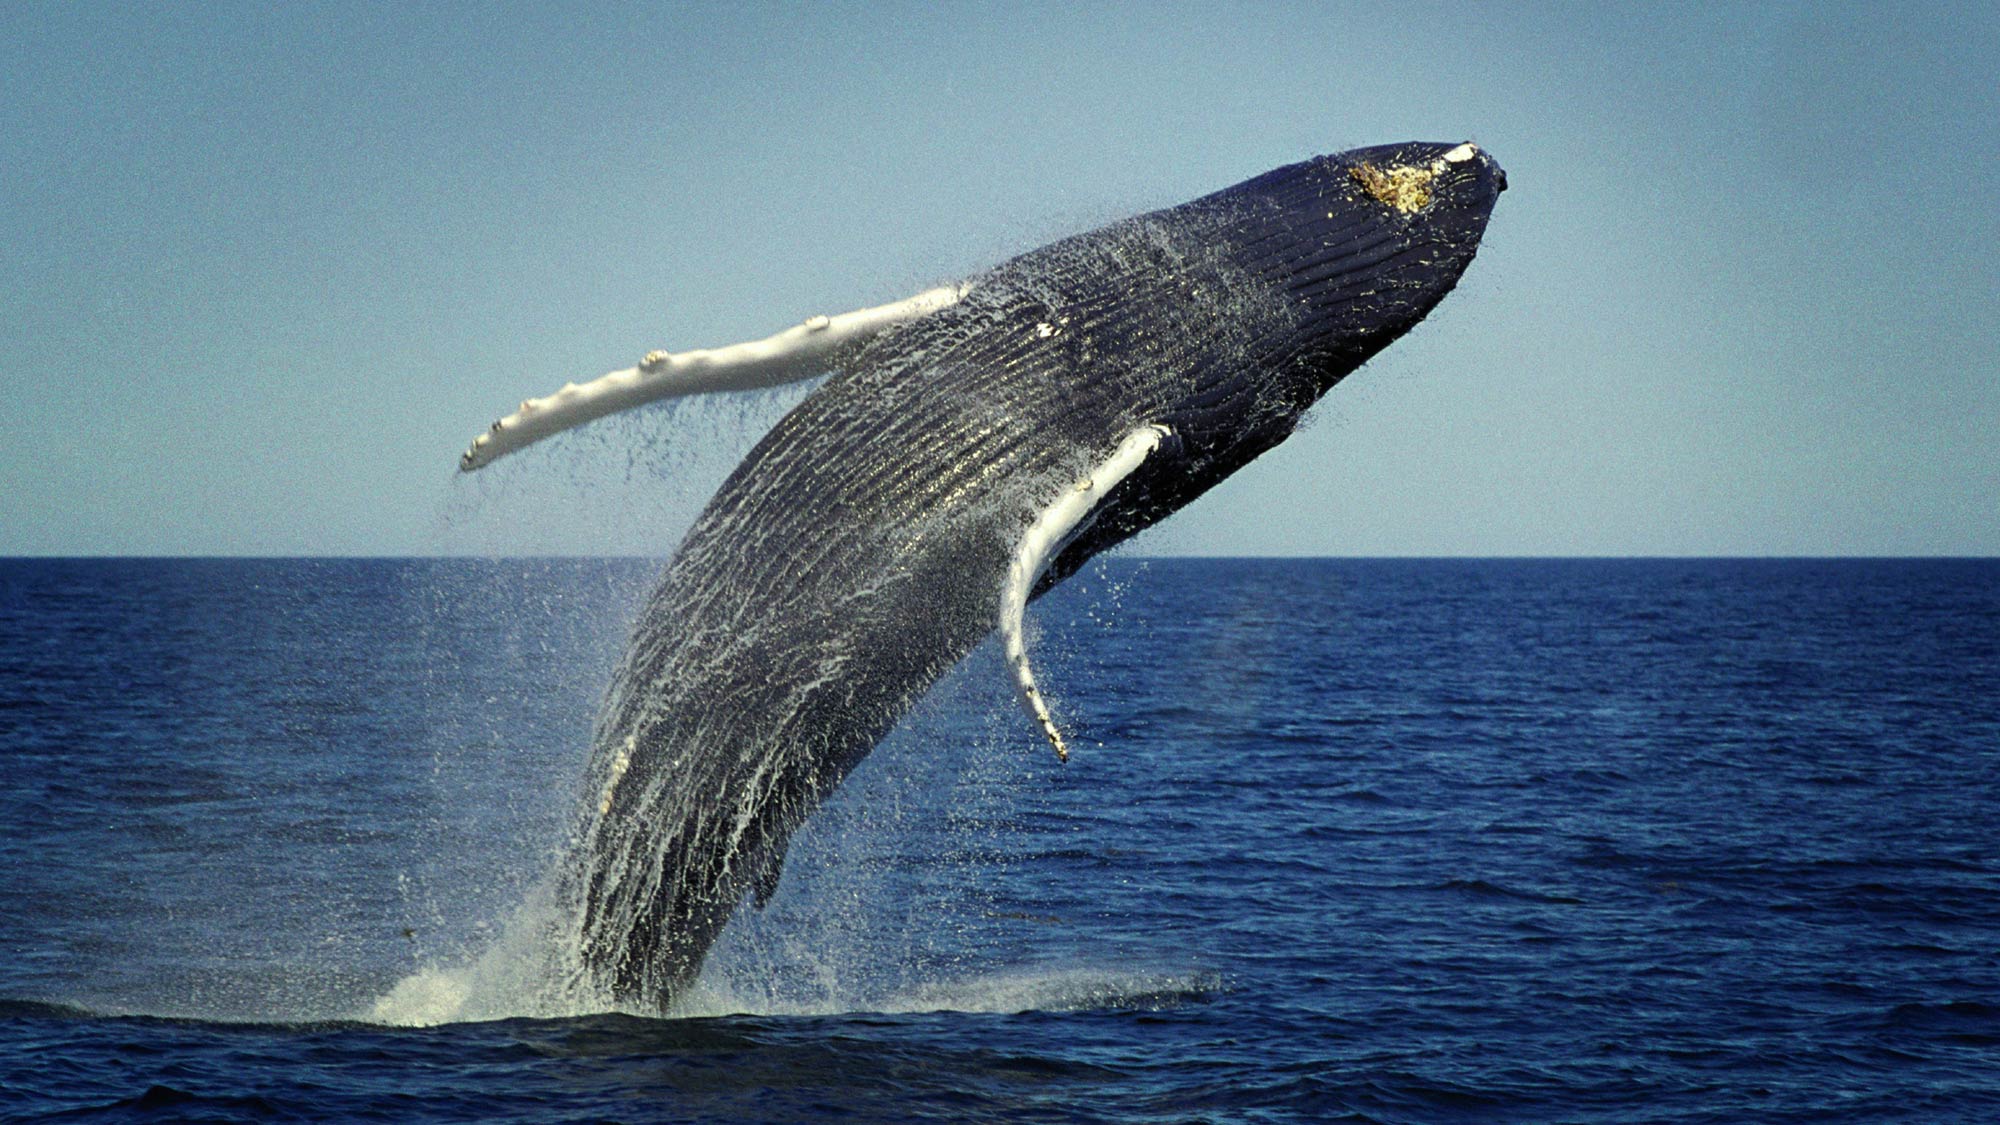 A Hump Back Whale breaching off the coast of Maine. Photo: iStock. iStock_000009634005_Large 